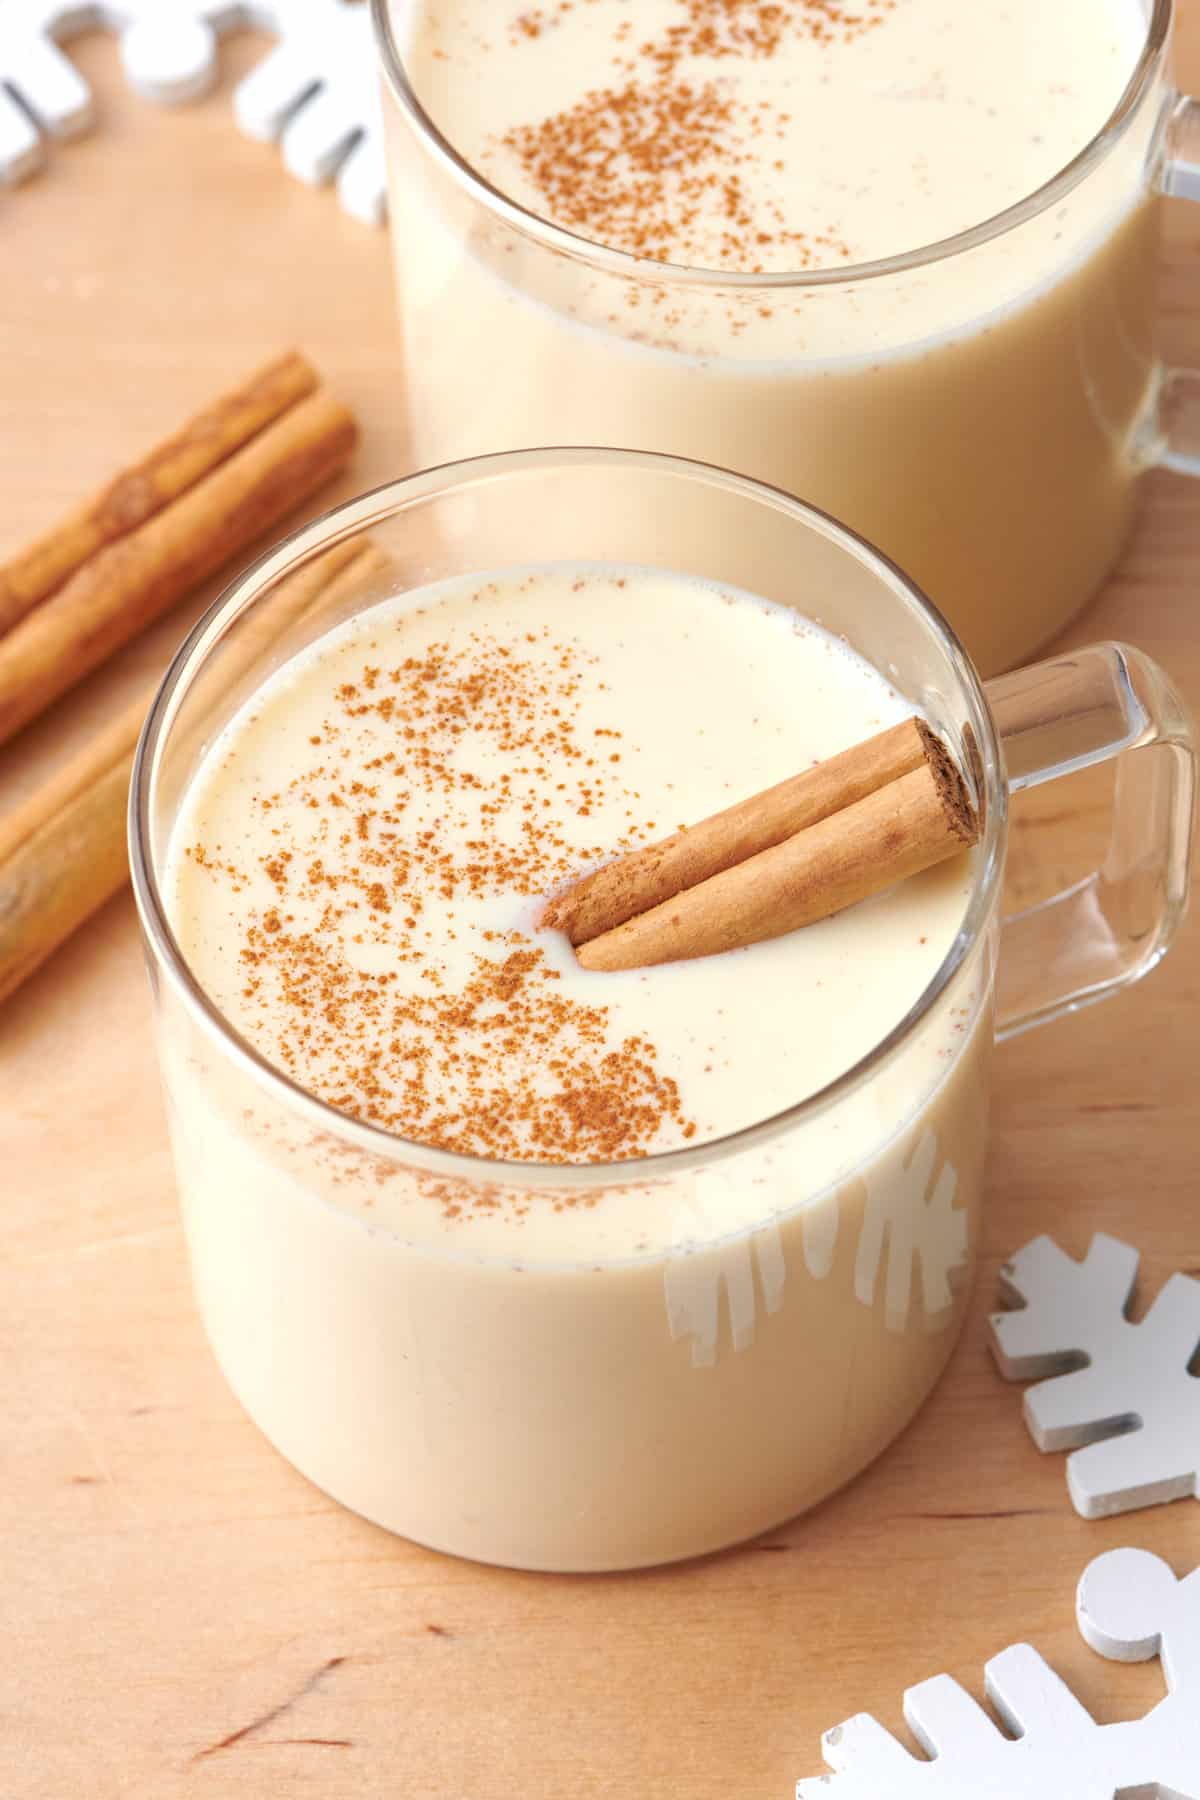 Homemade eggnog in a glass mug with a cinnamon stick inside and another glass nearby.